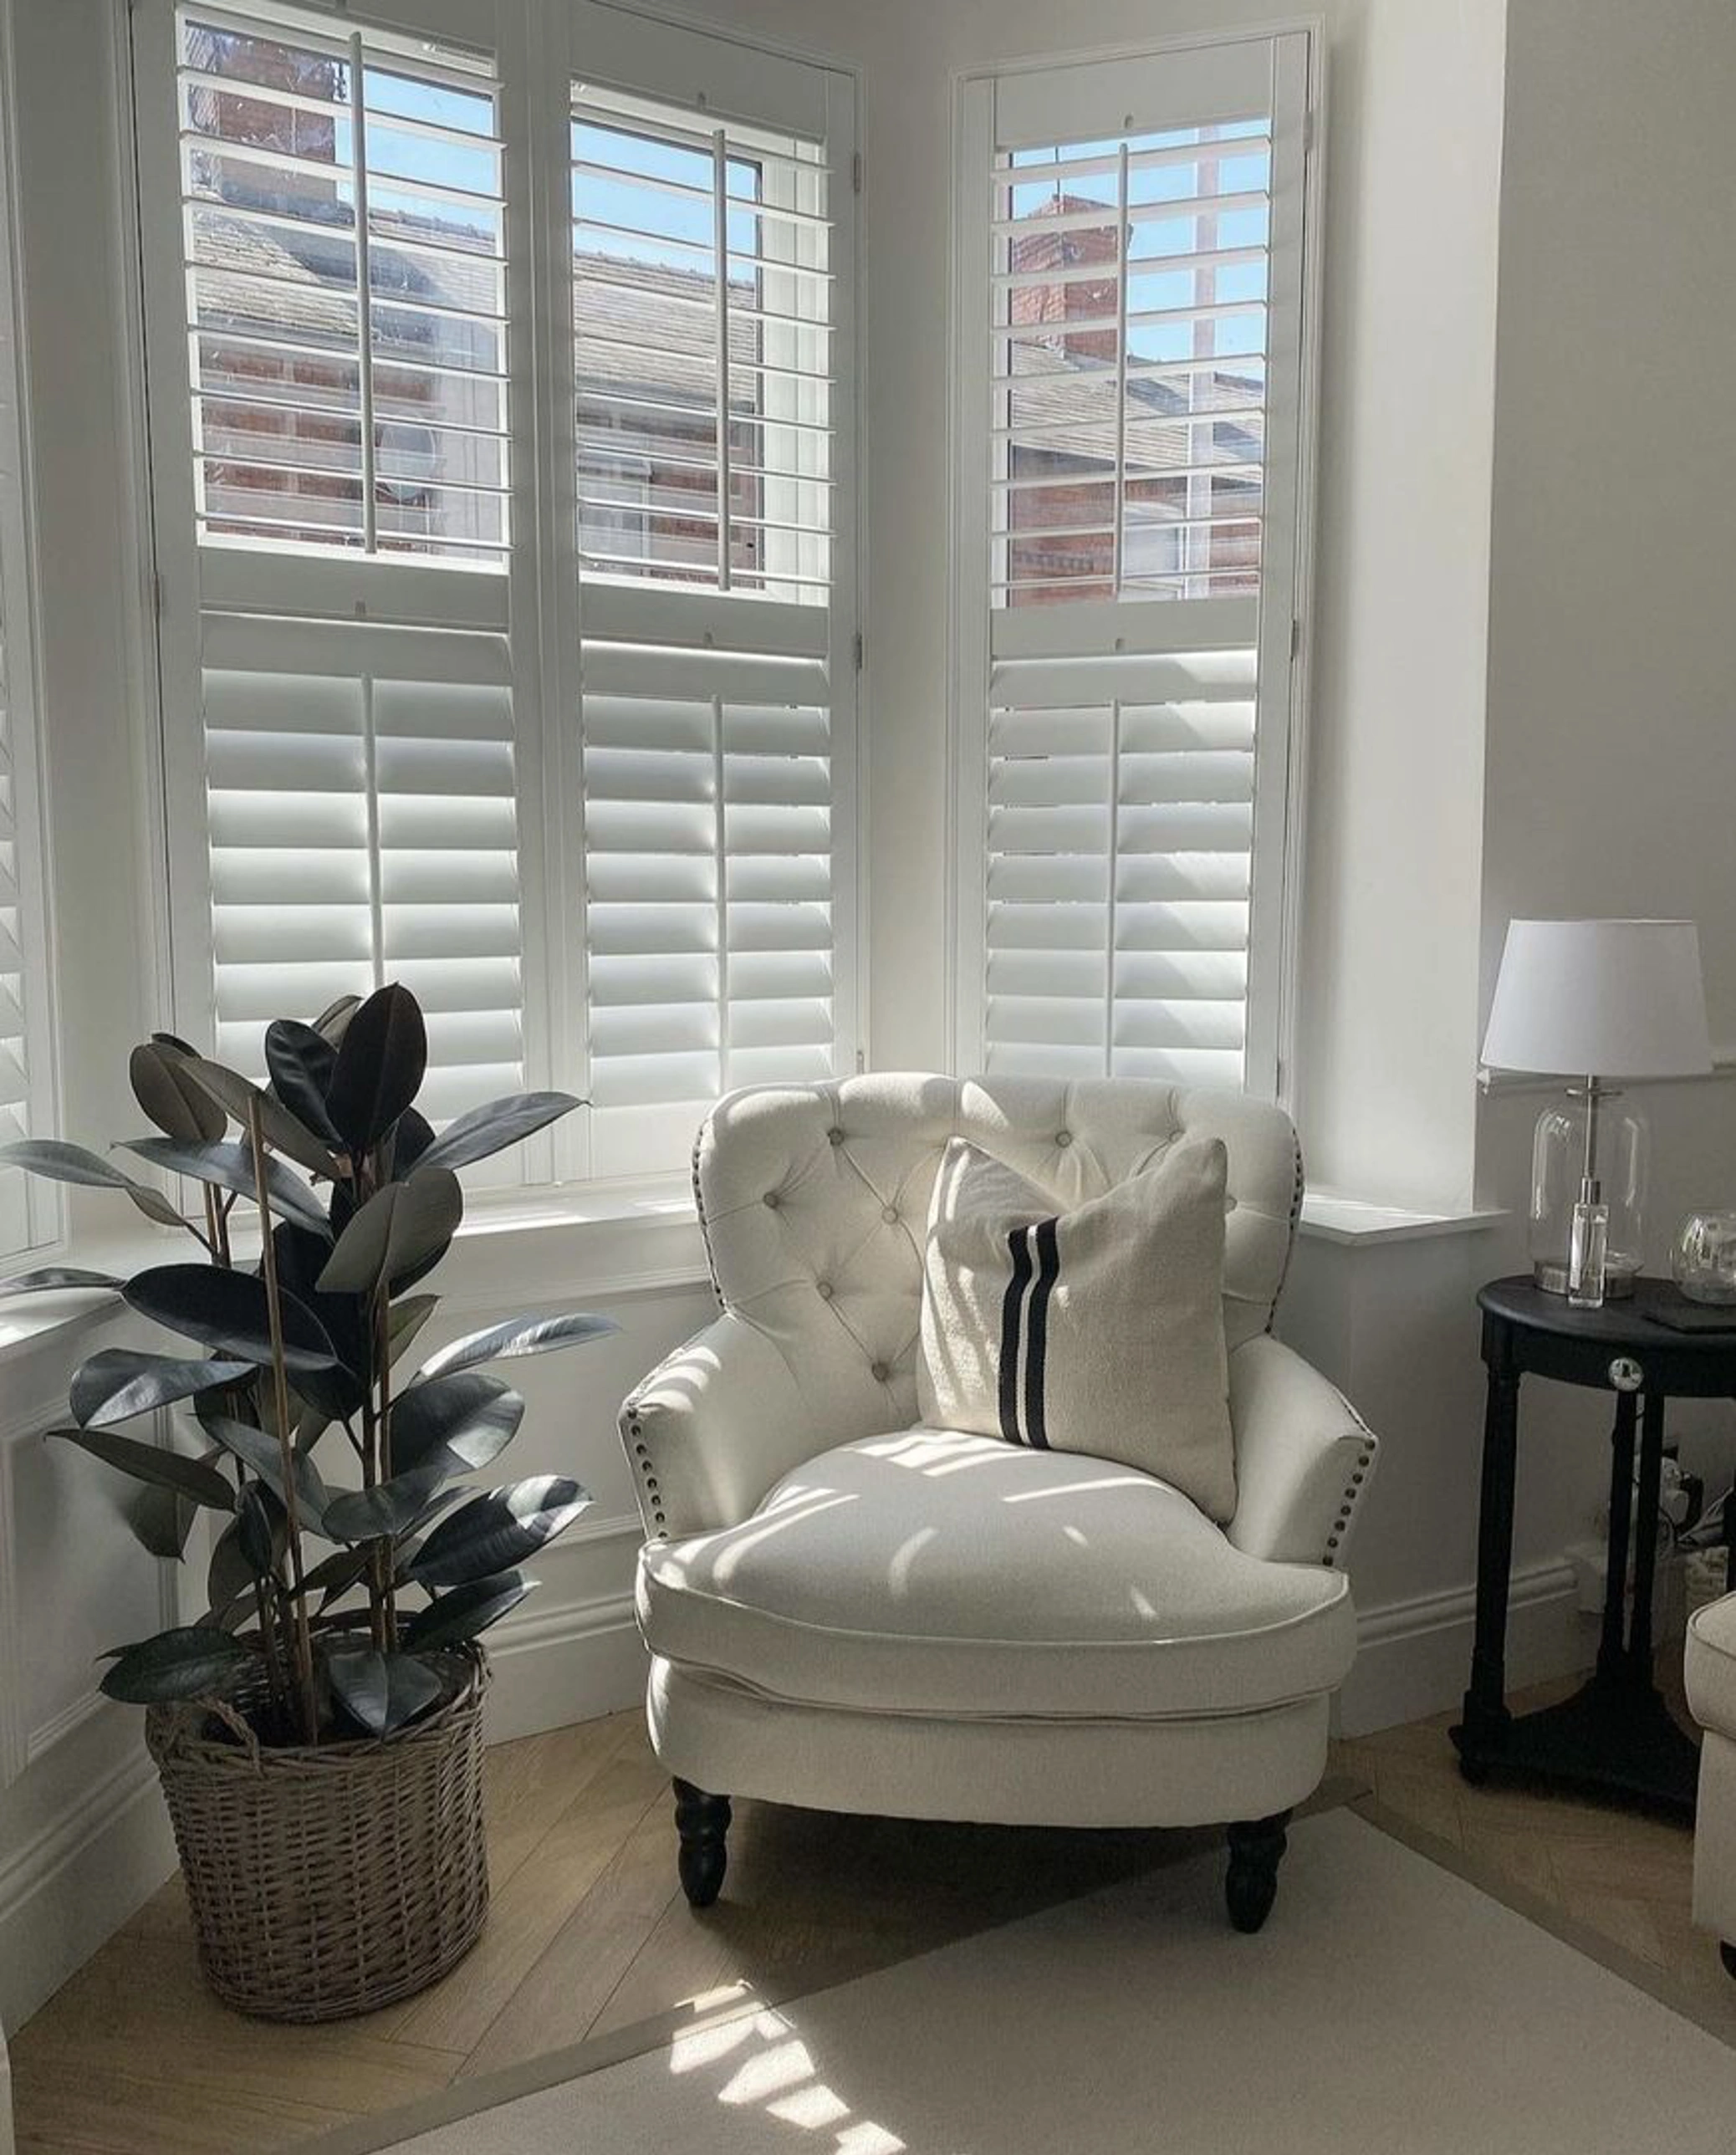 Vivid White wooden shutters with cream traditional armchair